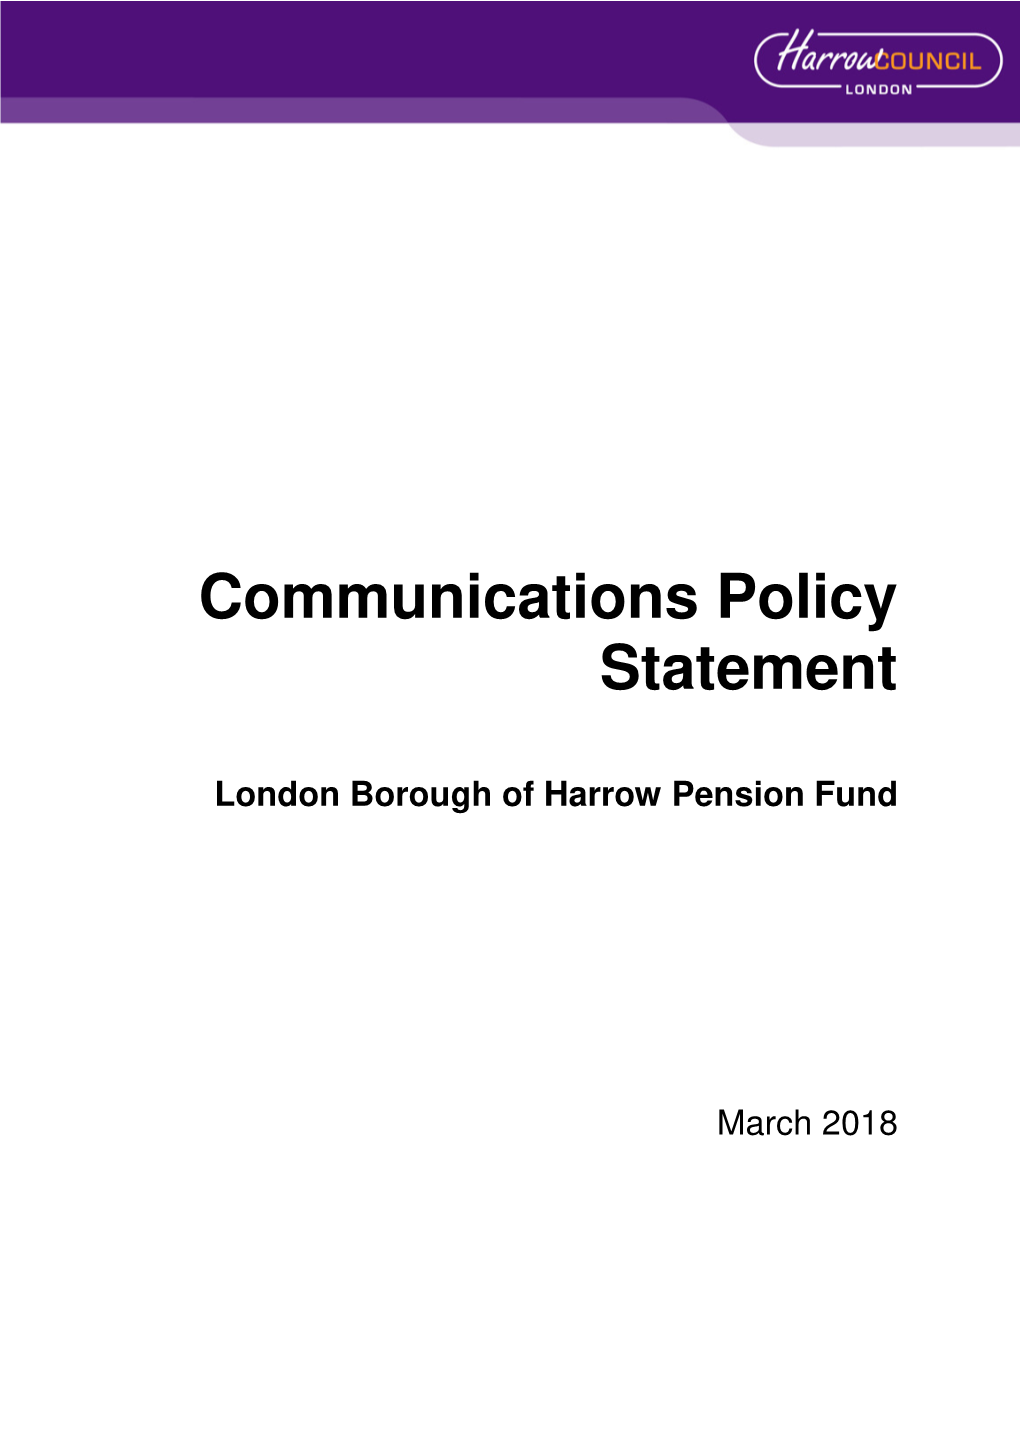 Communication Policy March 2018 (Pdf)